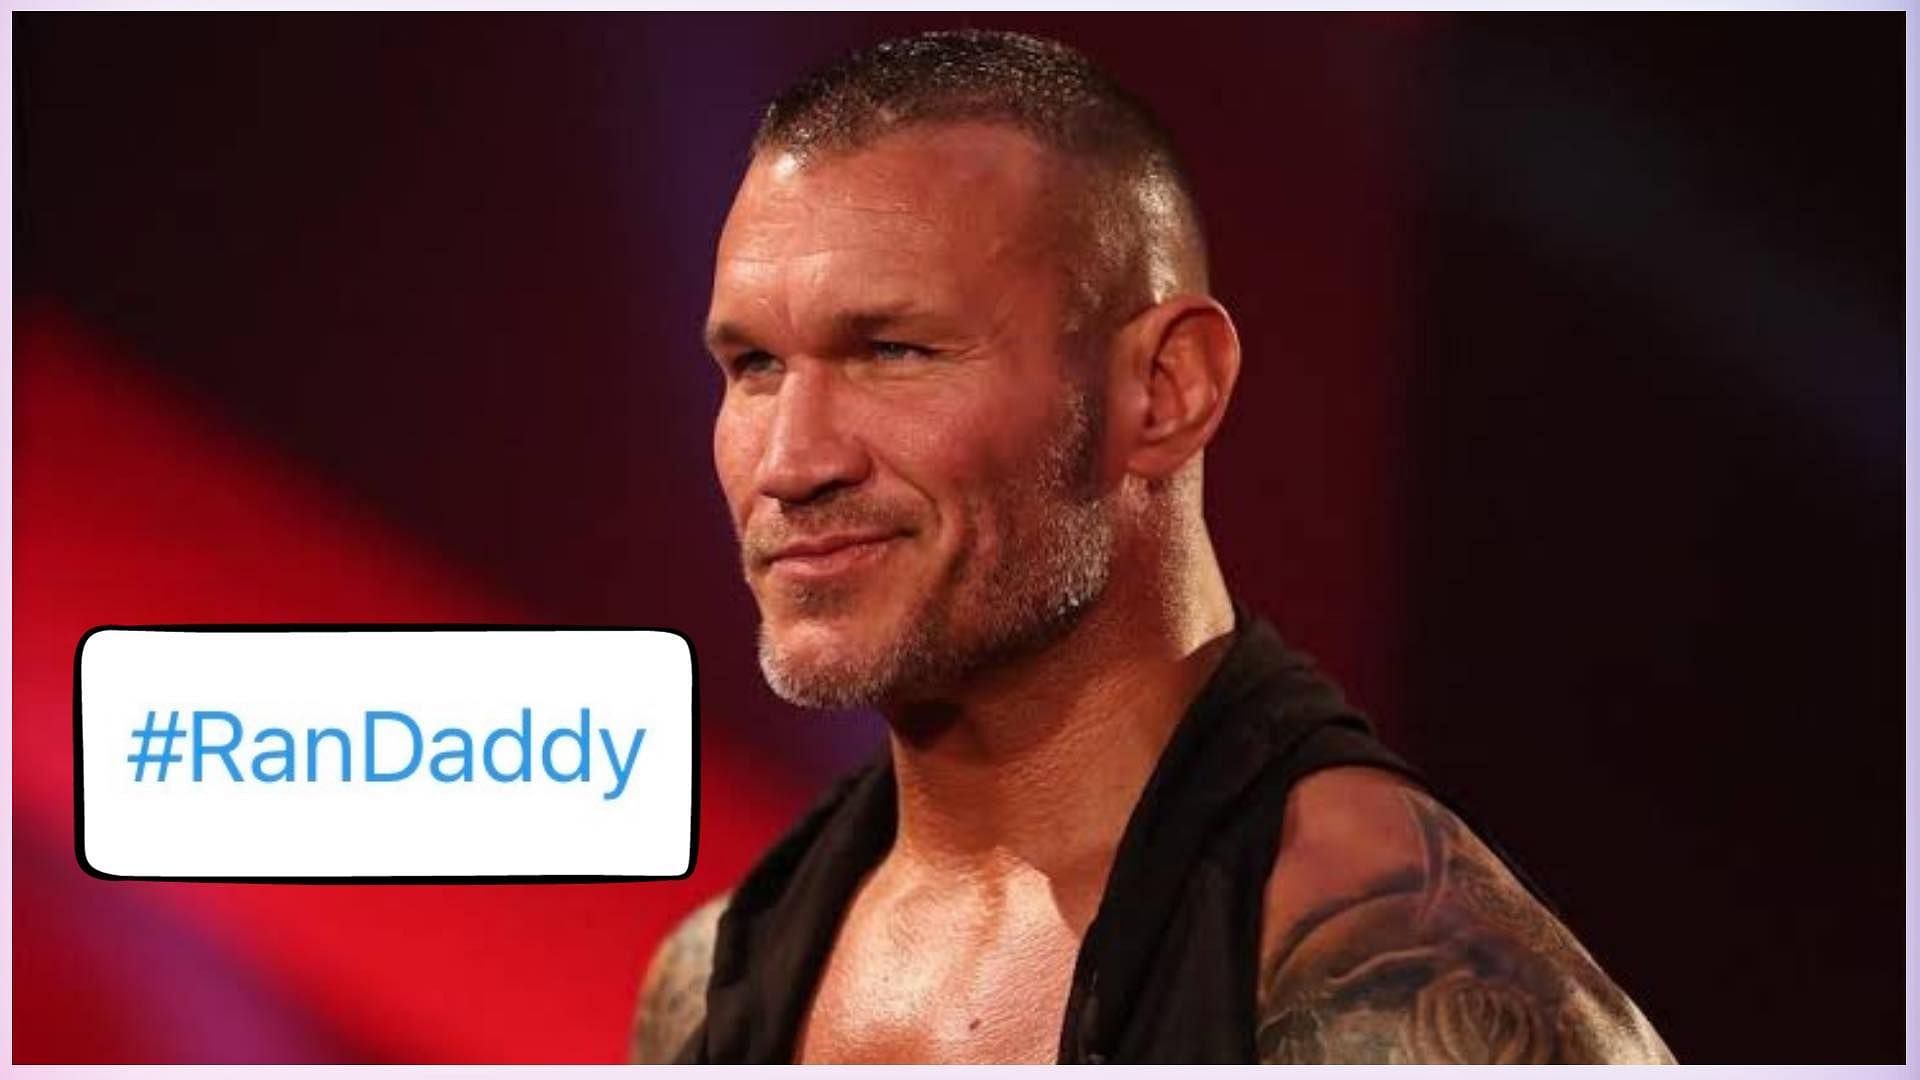 Randy Orton is back and better than ever